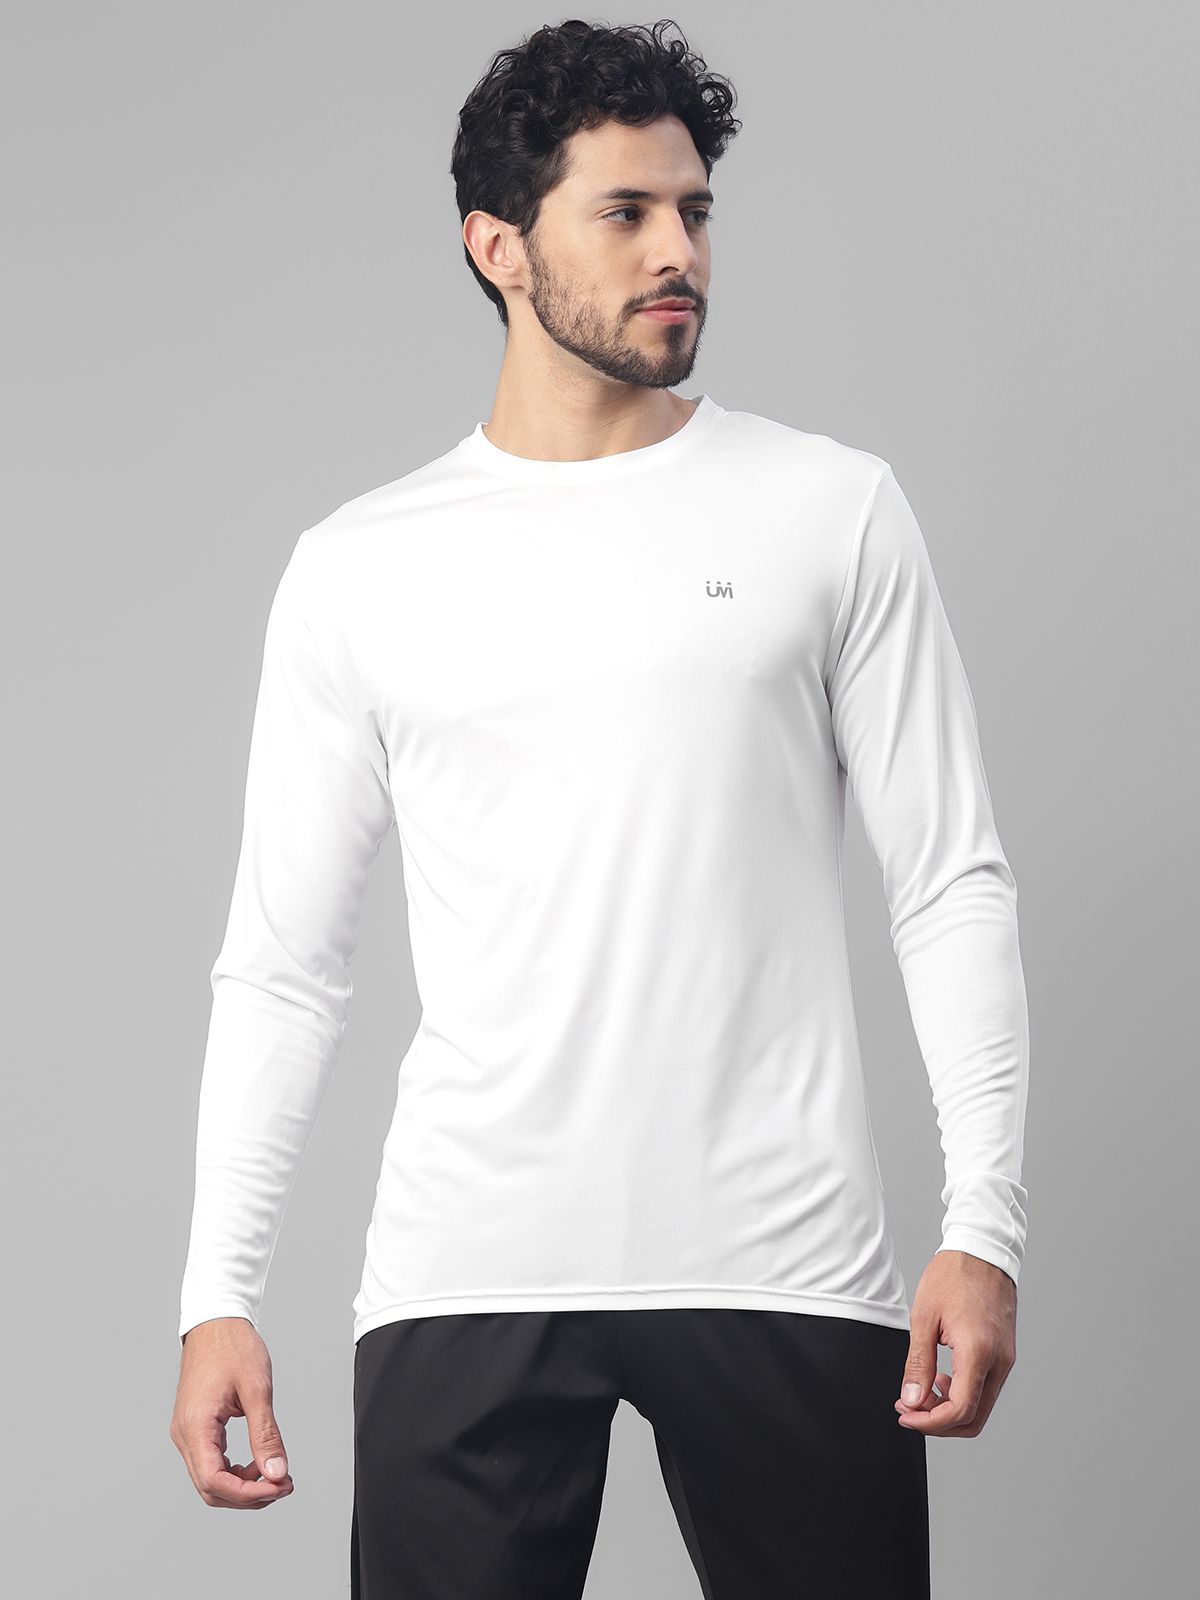     			UrbanMark Mens Regular Fit Quick Dry Sports Round Neck Full Sleeves Solid T Shirt -White